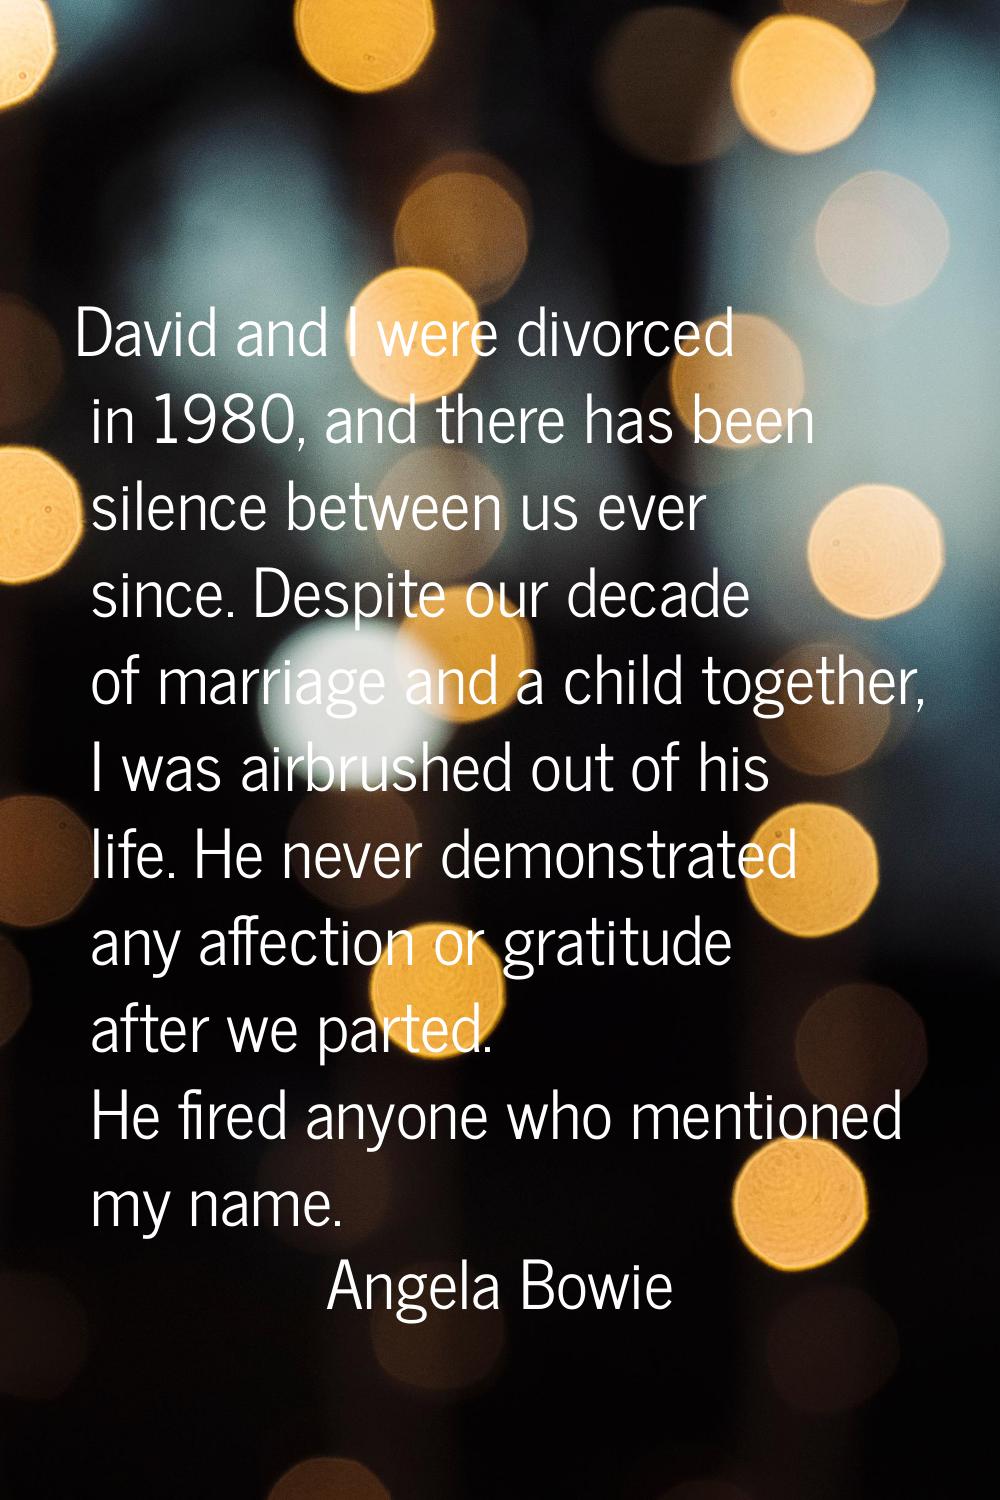 David and I were divorced in 1980, and there has been silence between us ever since. Despite our de